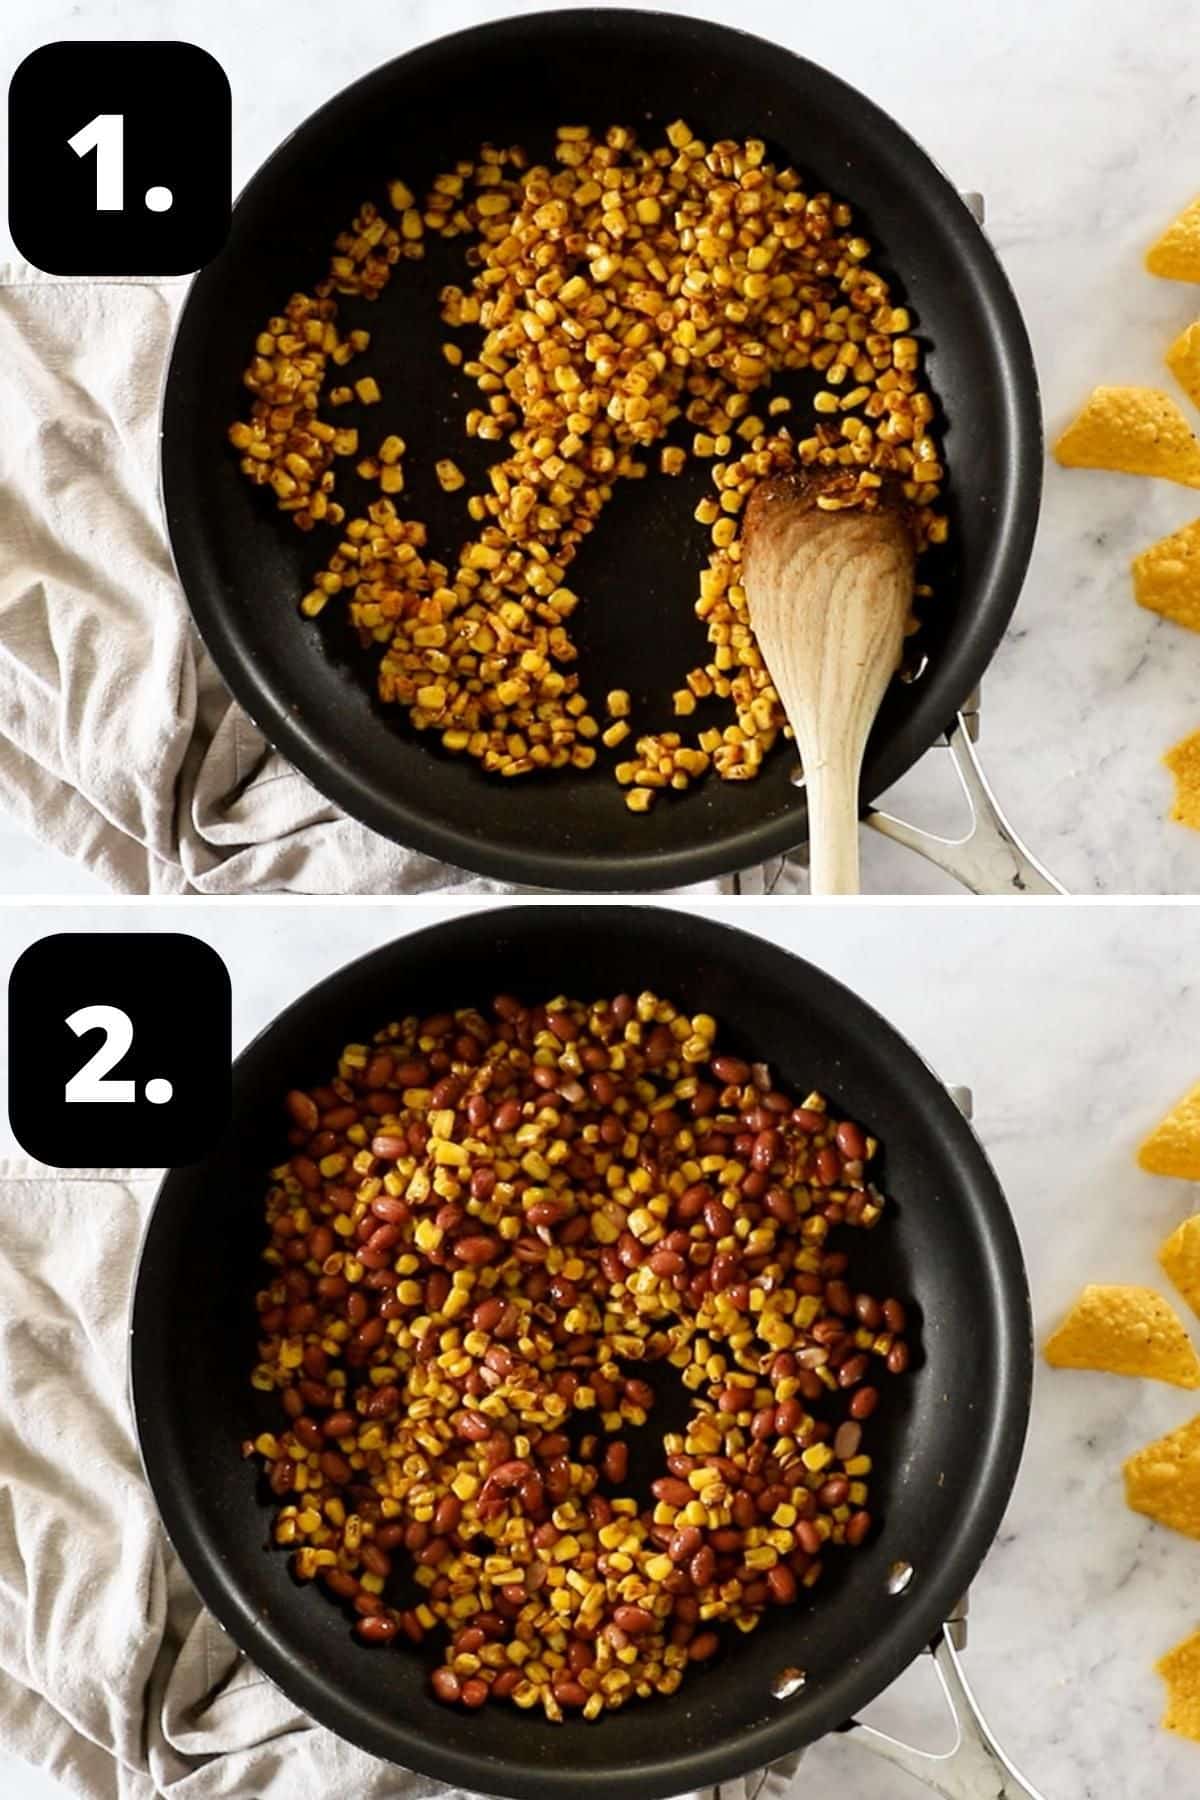 Steps 1-2 of preparing this recipe: sautéing the corn in a frying pan before adding the beans to the pan.